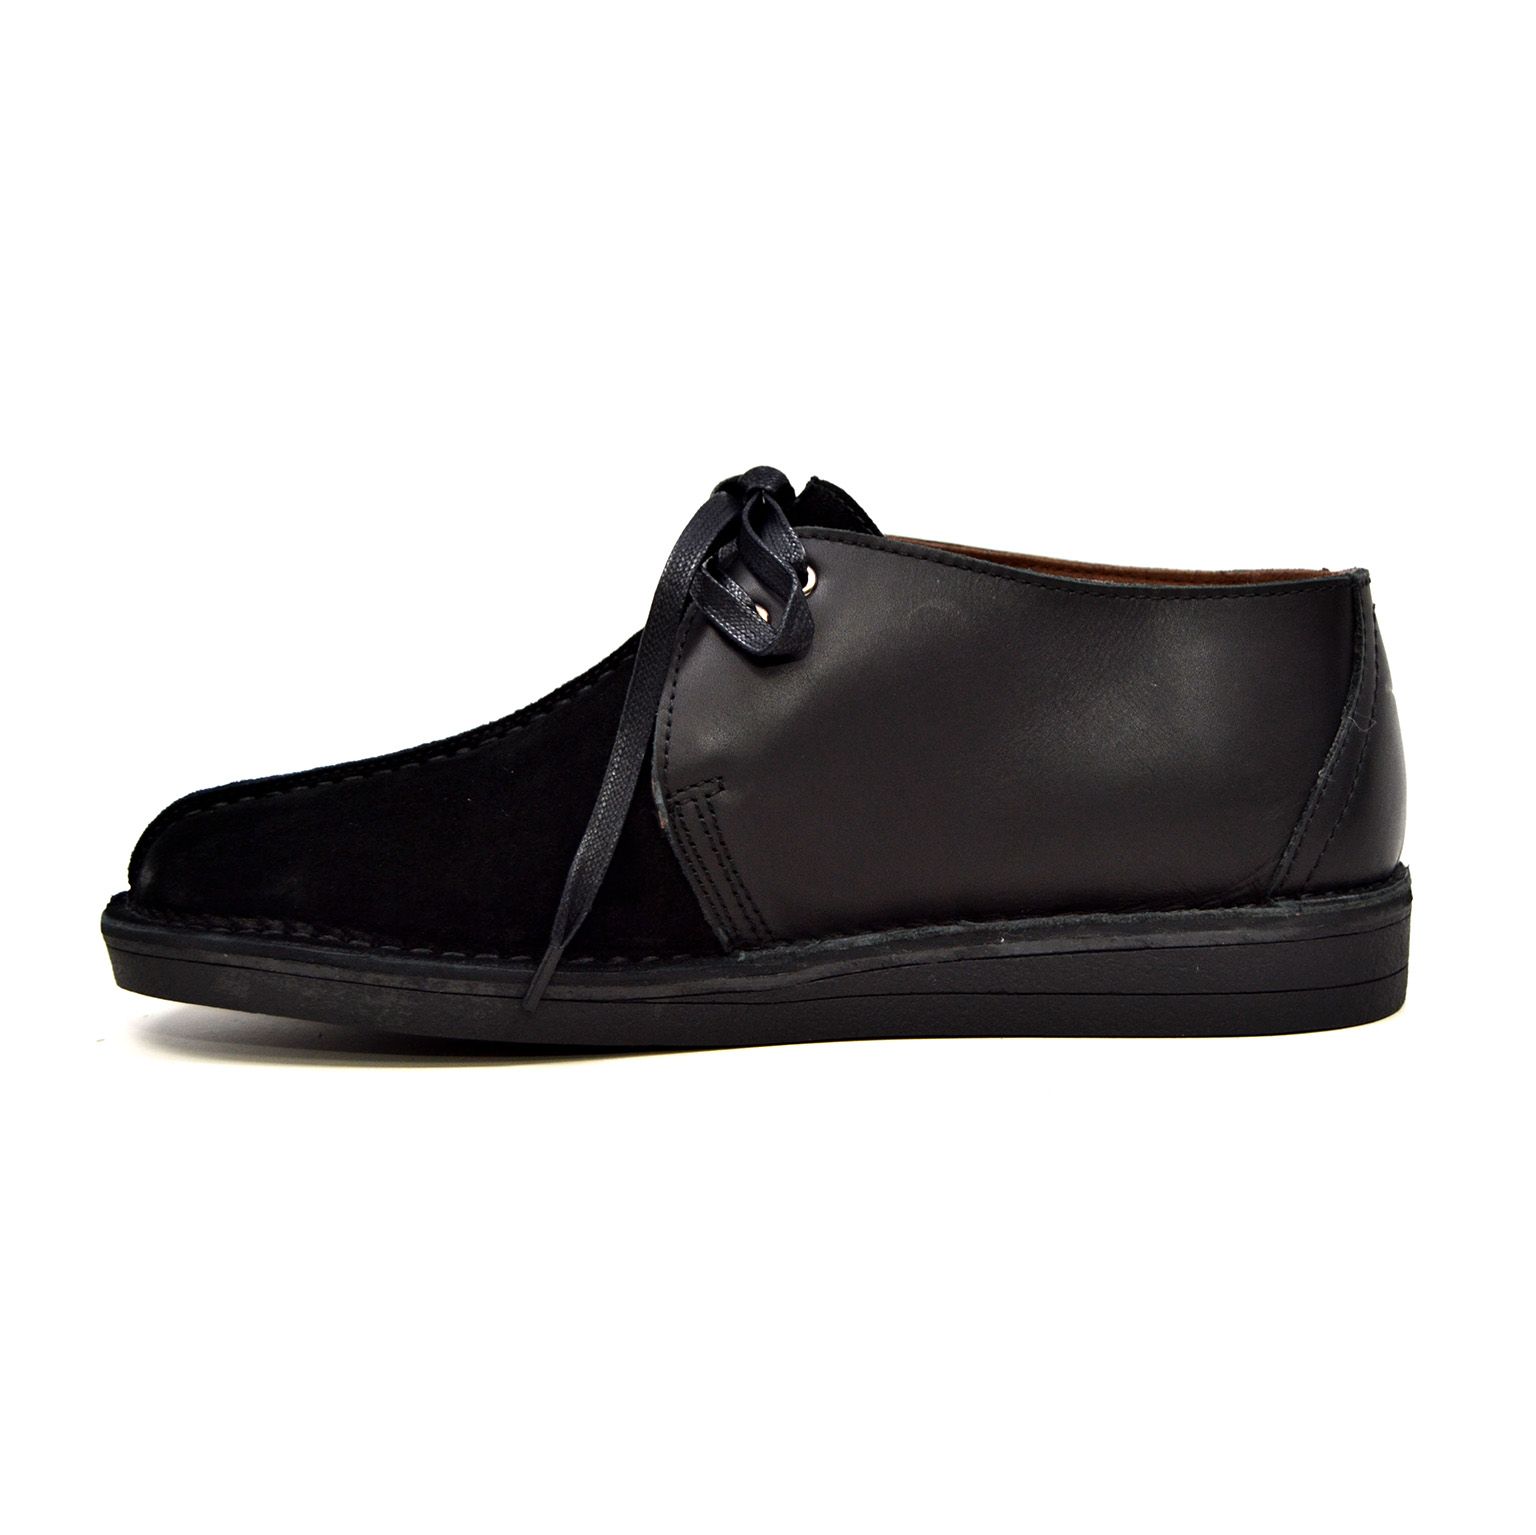 British Collection Kingston, Black Leather and Suede [6391-5] - $99.99 ...